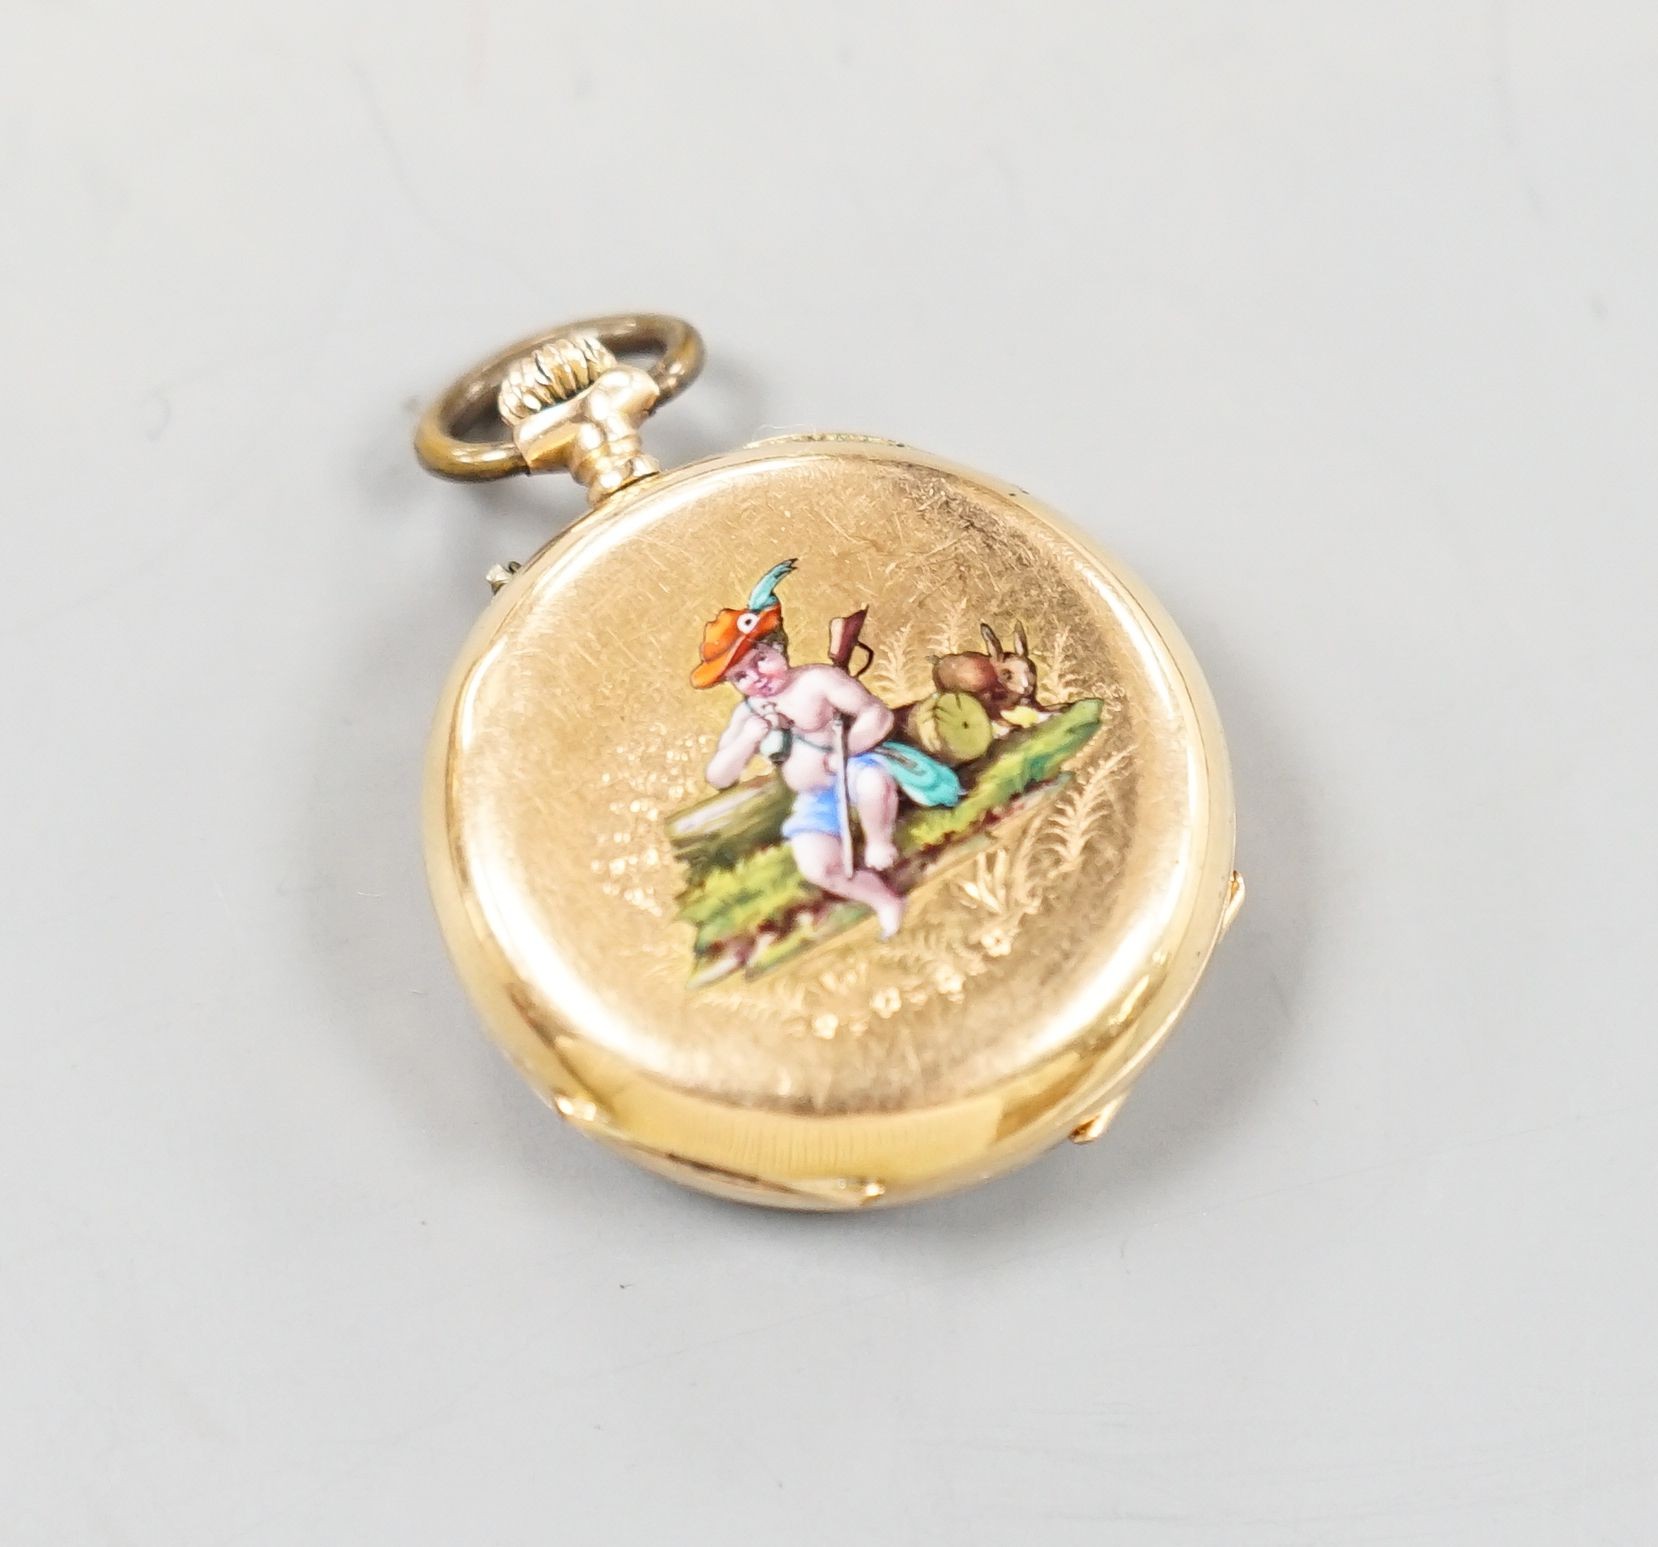 A continental 18k and enamelled open face keyless fob watch, decorated with a young boy hunting, case diameter 30mm